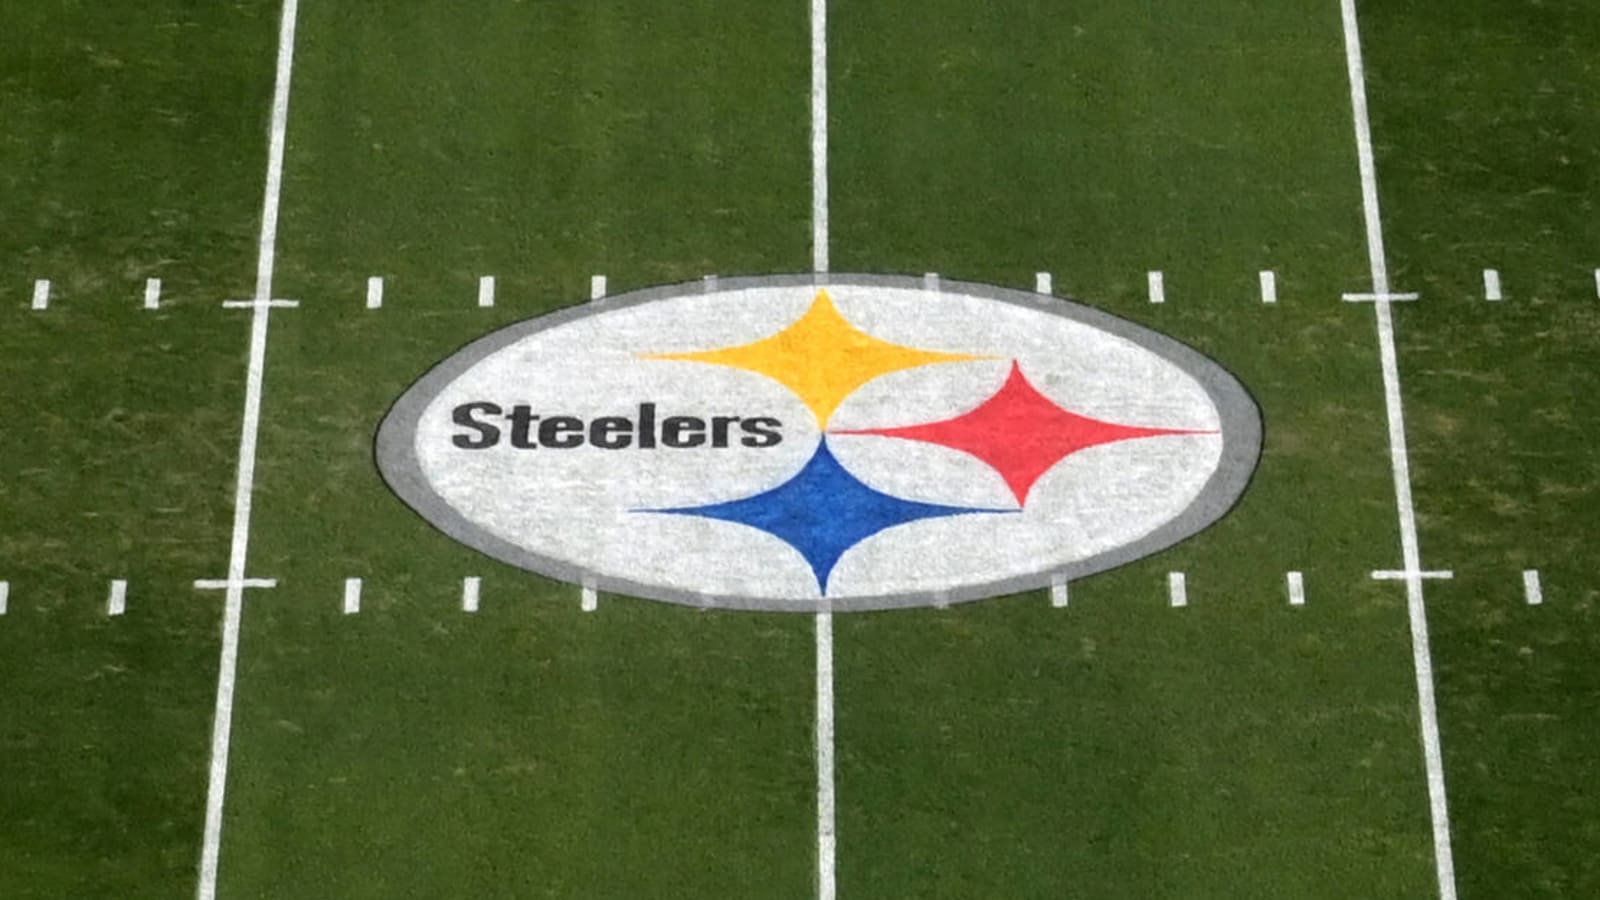 Acrisure paying over $10M per year for Steelers naming rights